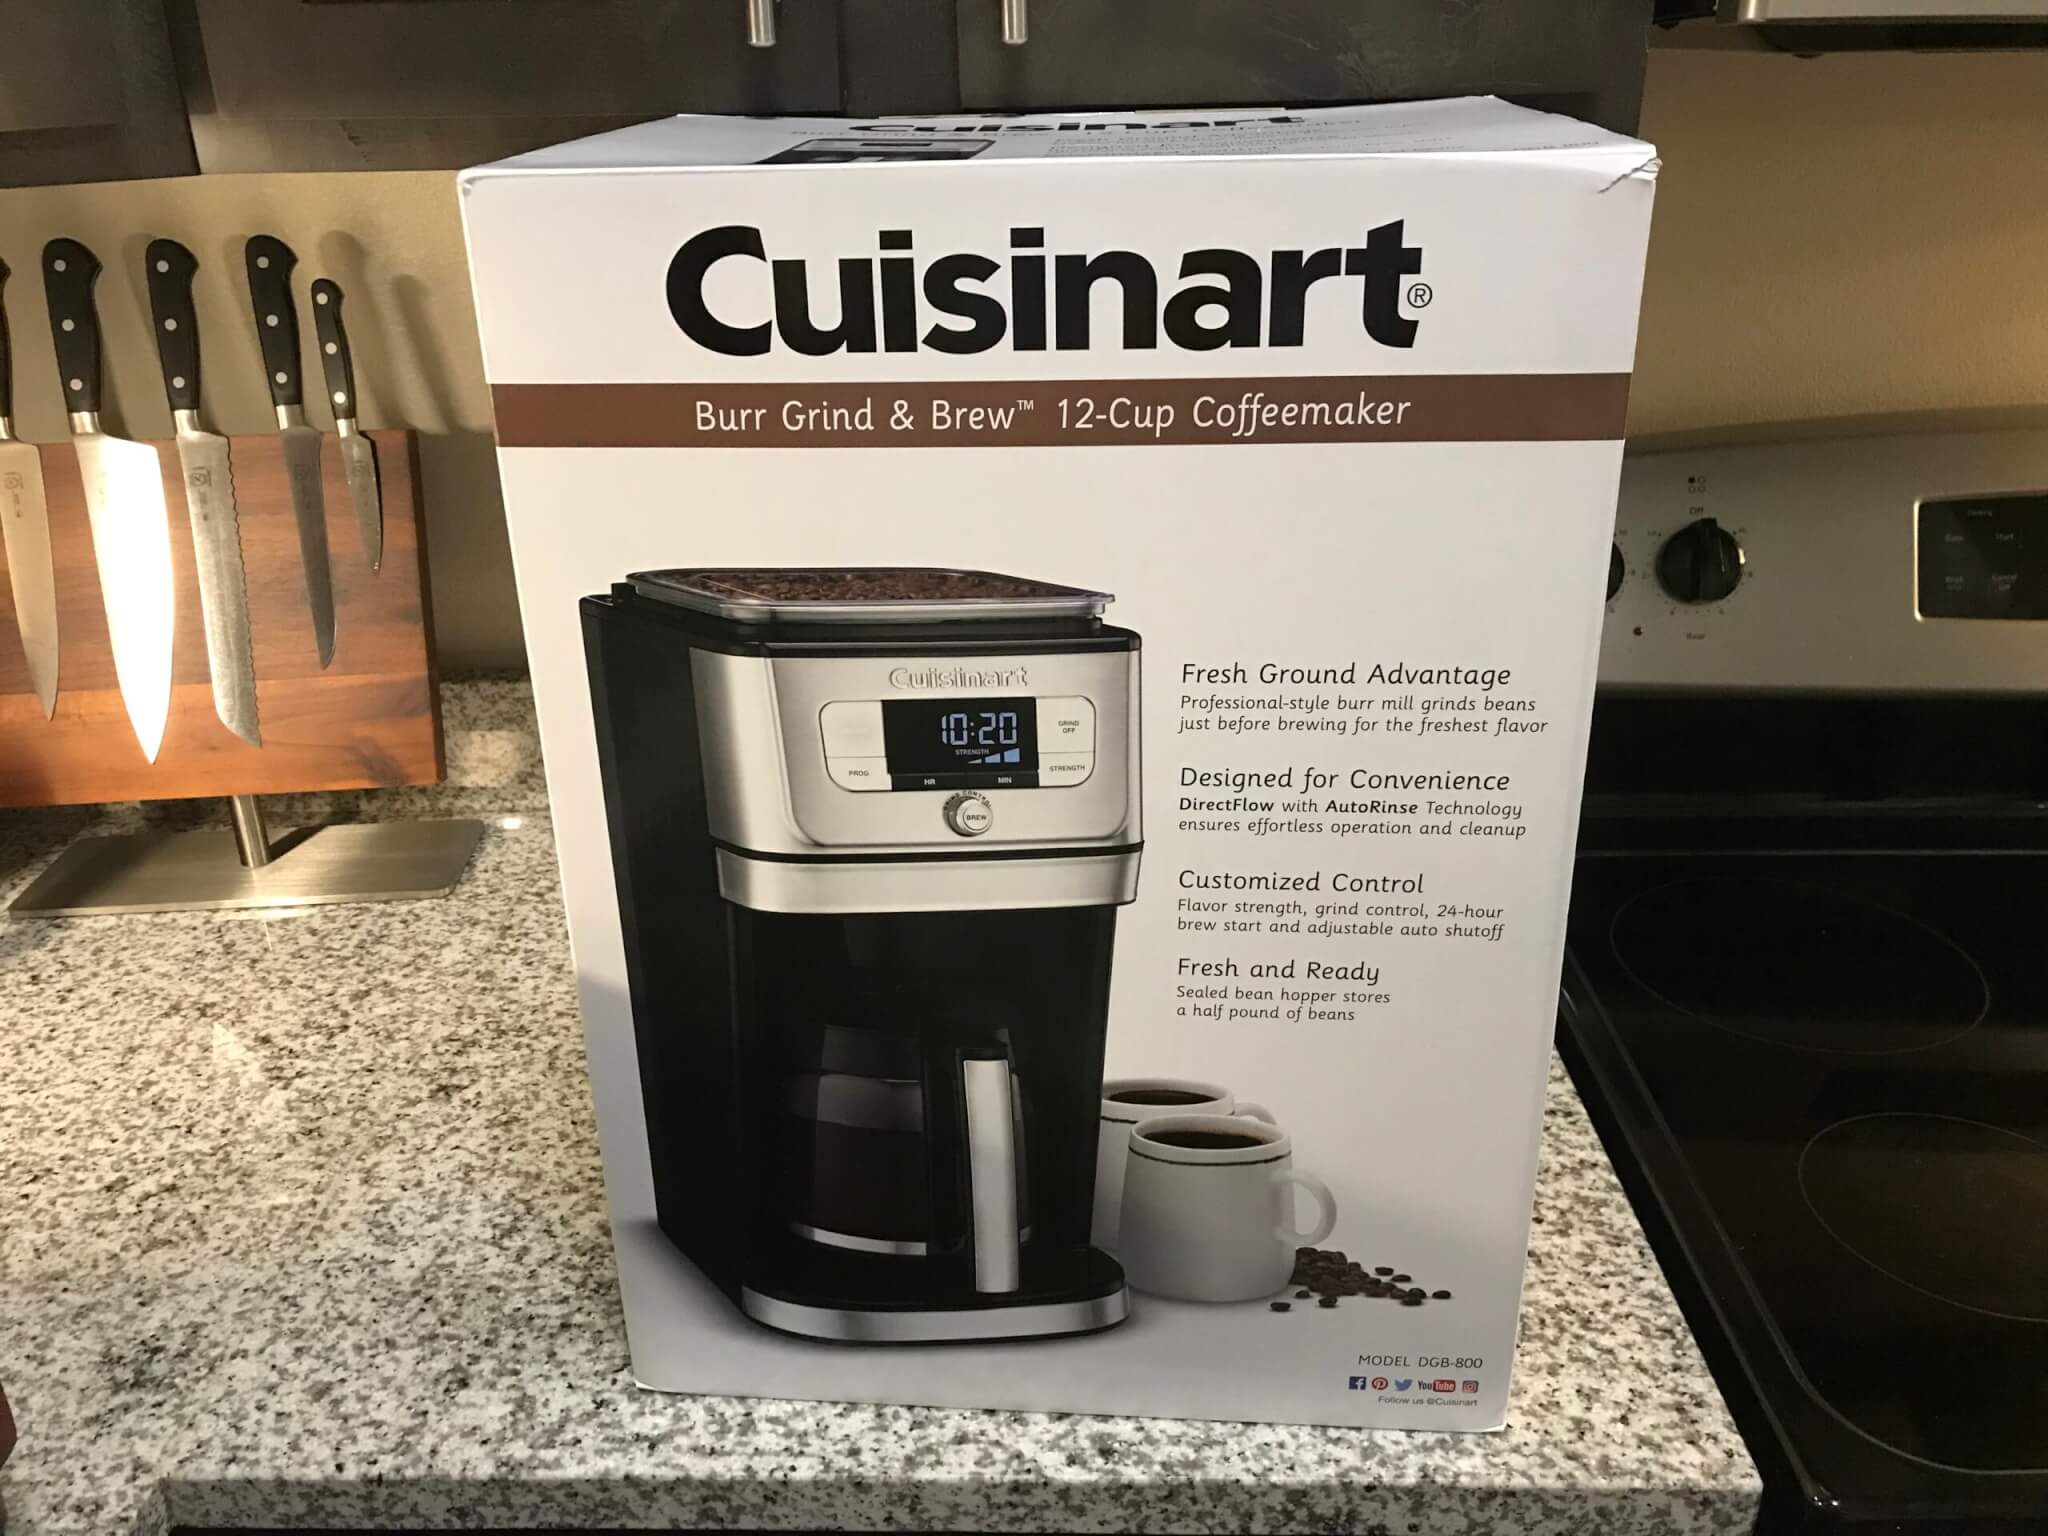 https://studyfinds.org/wp-content/uploads/2023/12/Cuisinart-DGB-800-Fully-Automatic-Burr-Grind-Brew-12-Cup-Glass-Box-scaled.jpeg